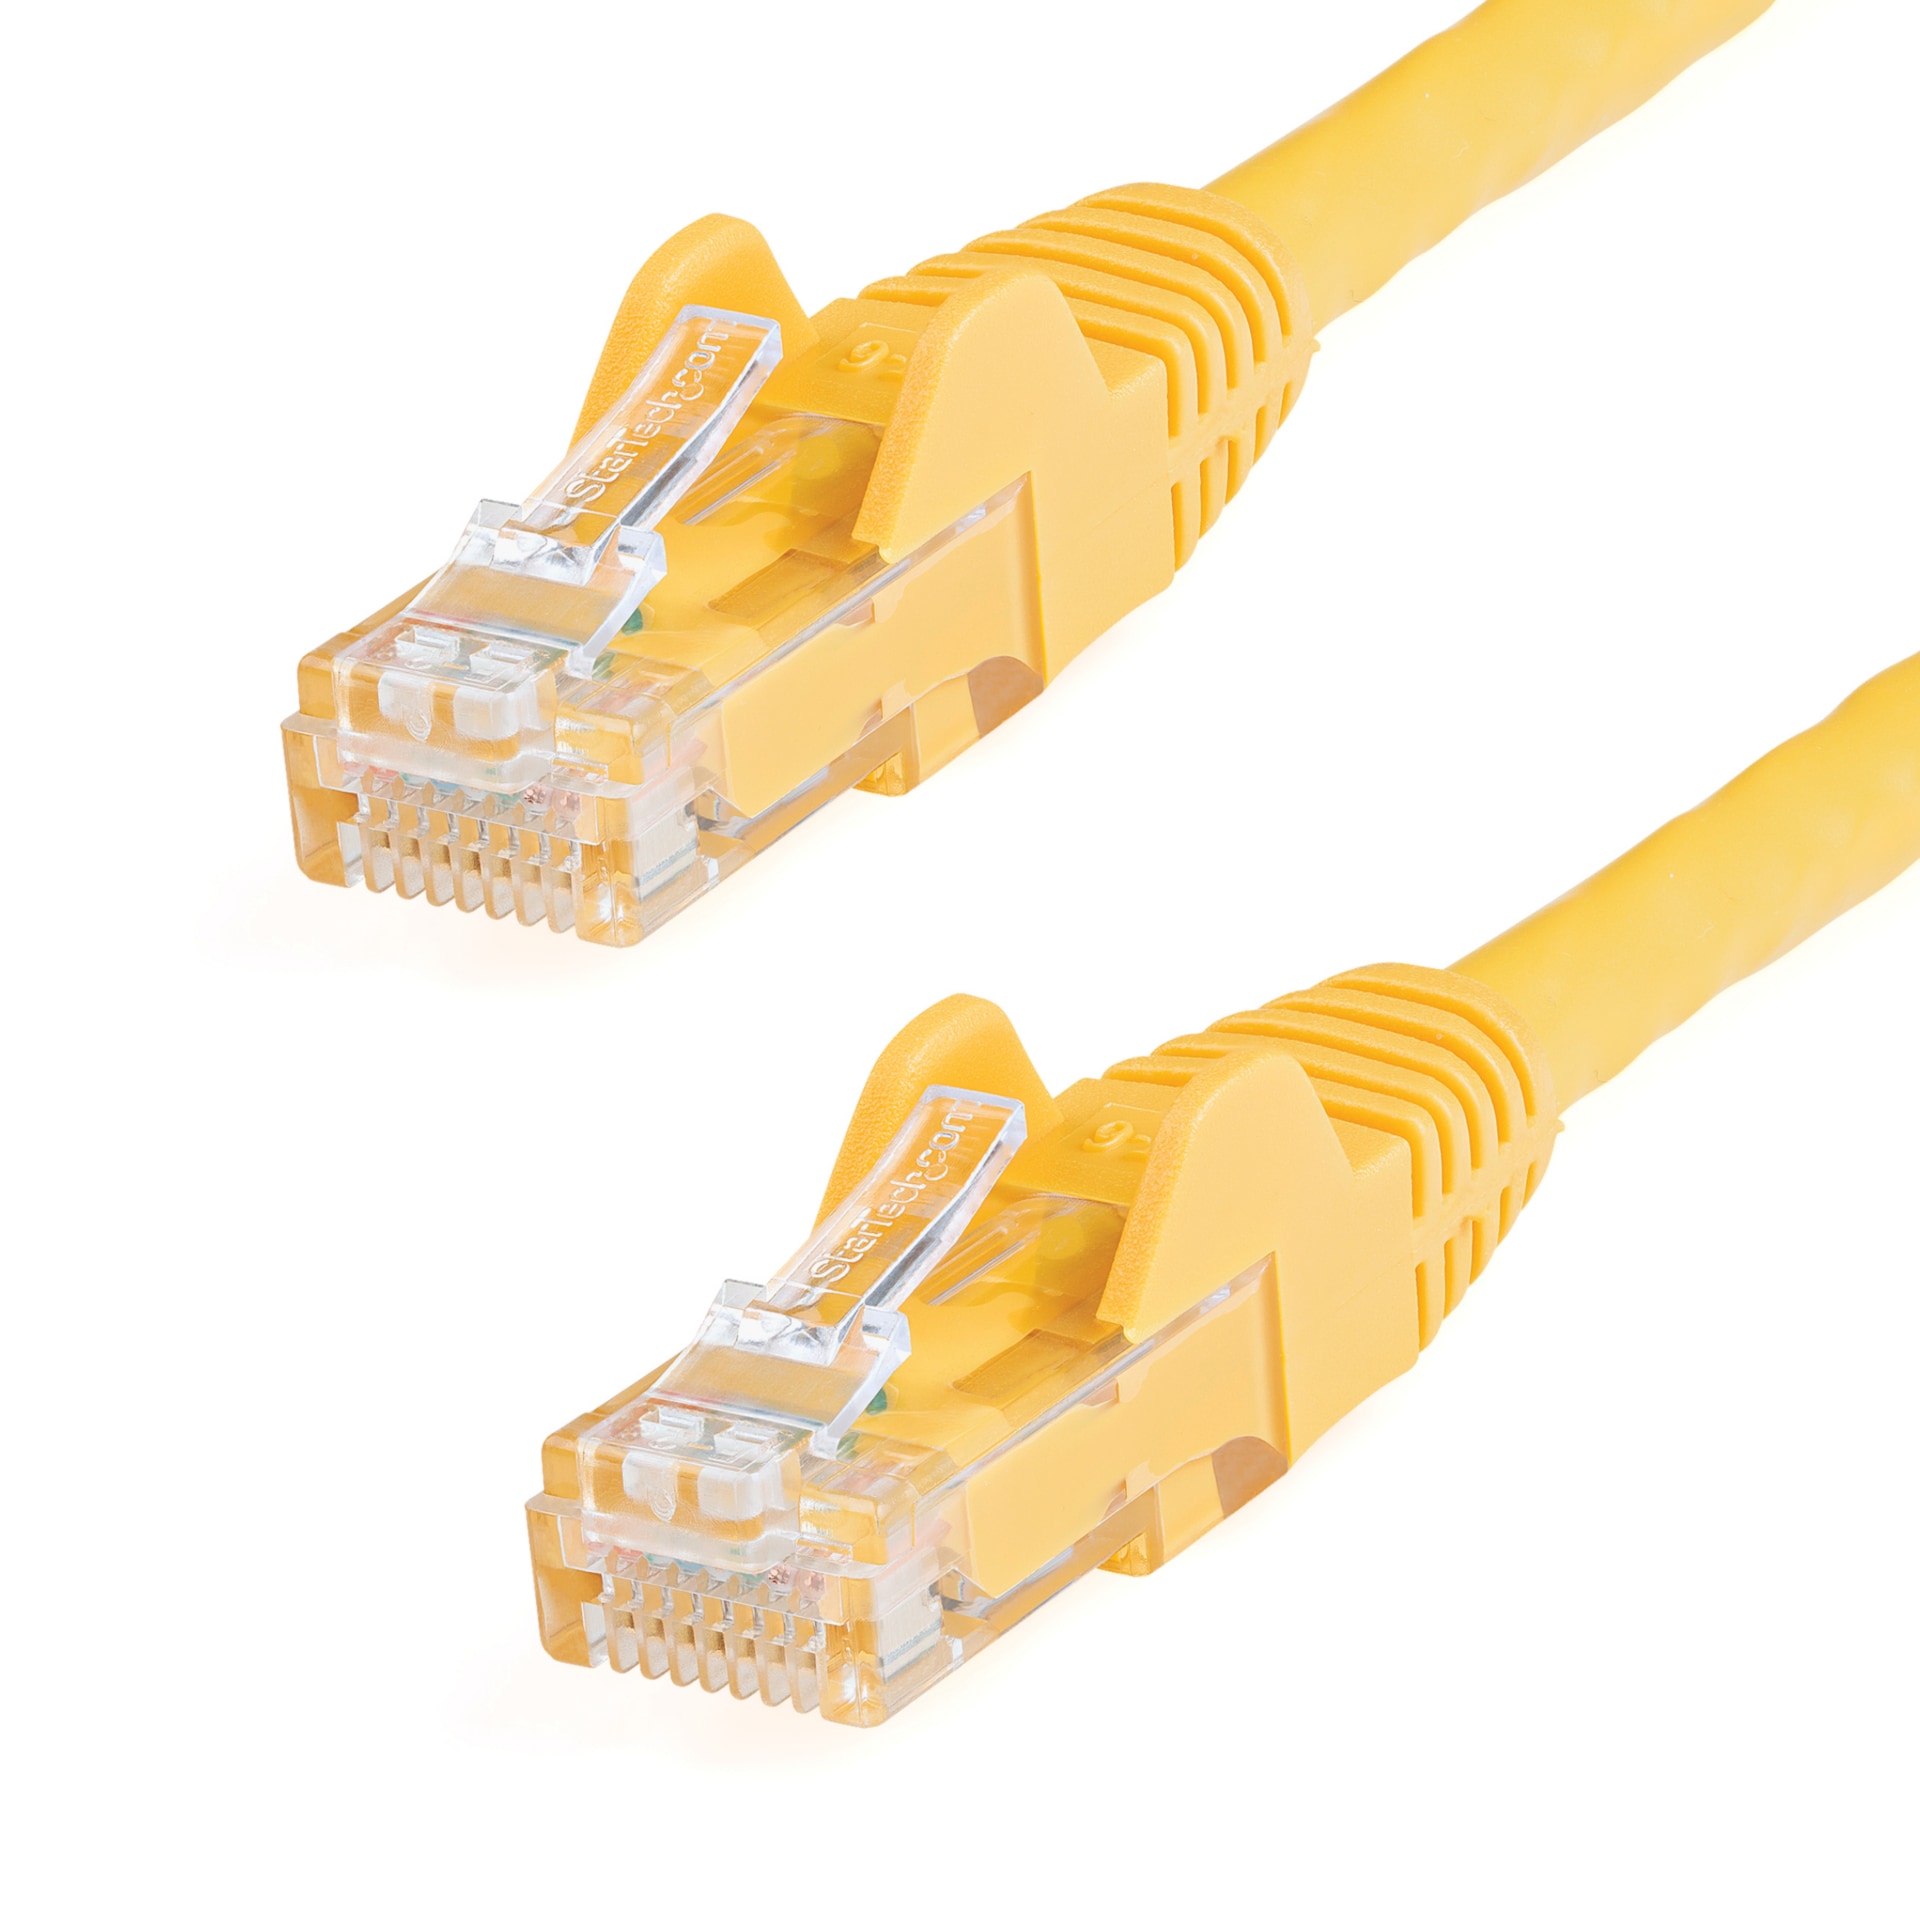 StarTech.com CAT6 Ethernet Cable 30' Yellow 650MHz PoE Snagless Patch Cord